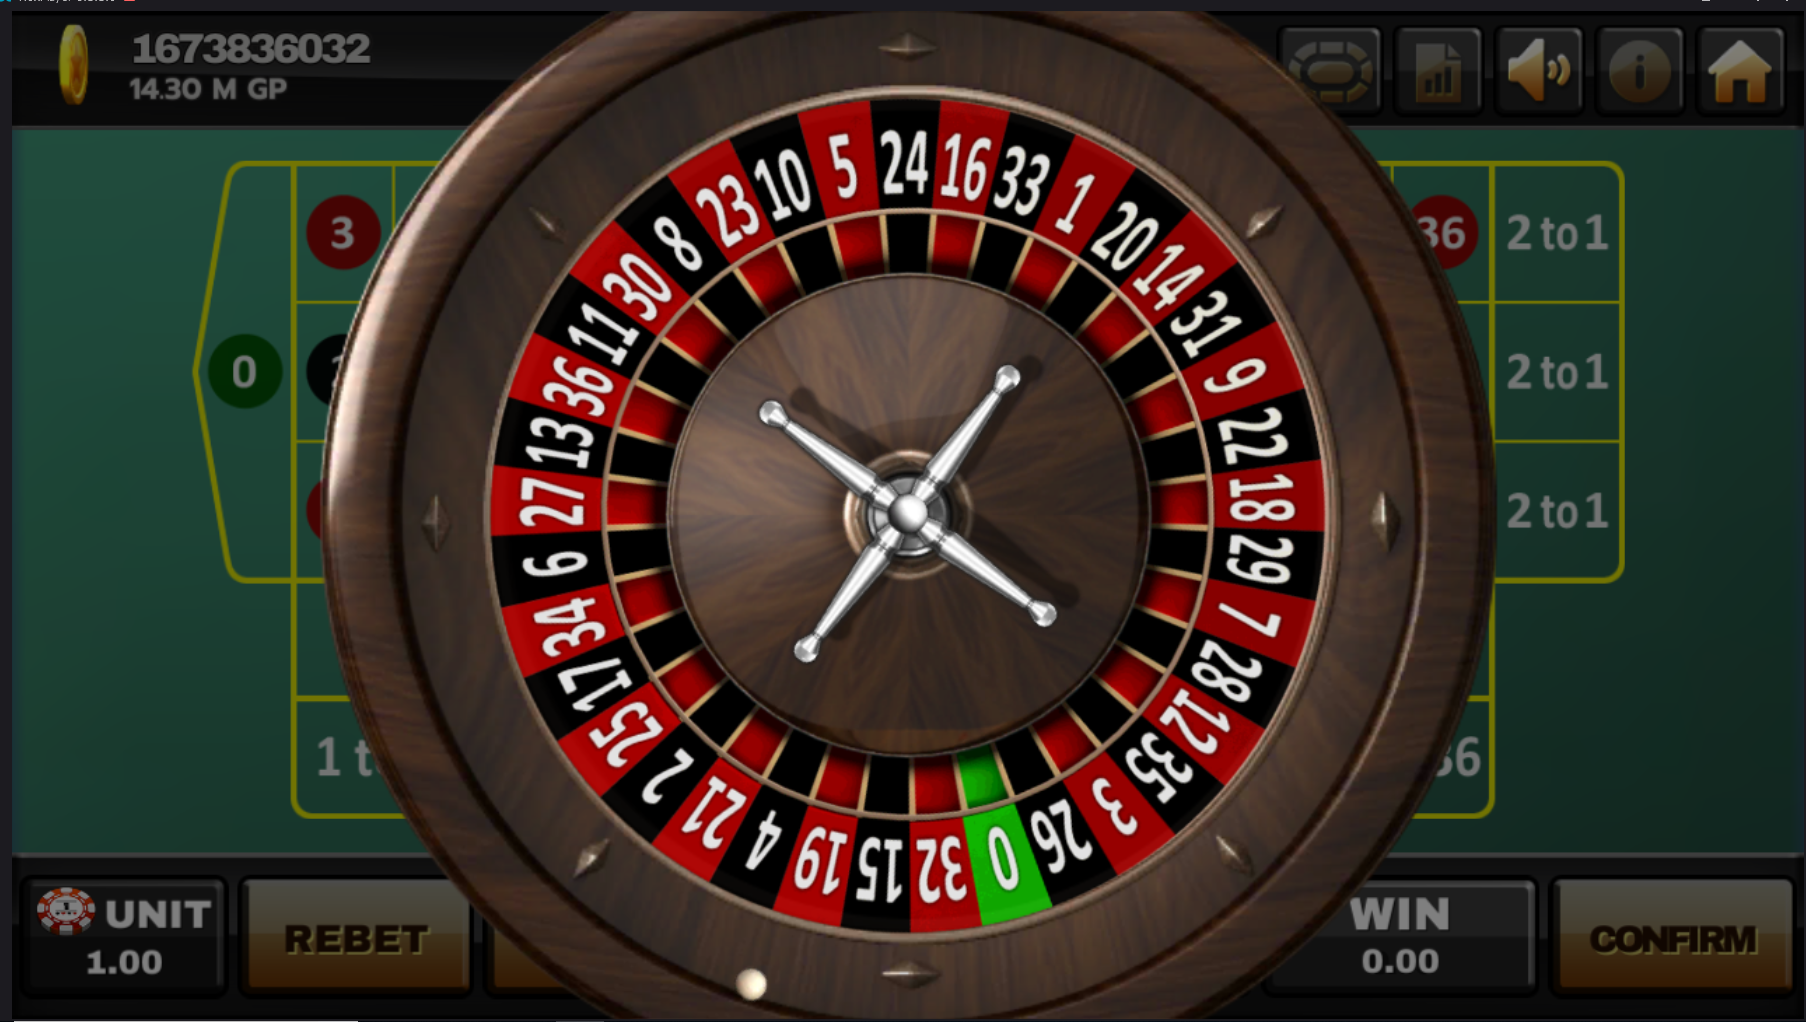 Lucky_Roulette_3.png - 1.74 MB